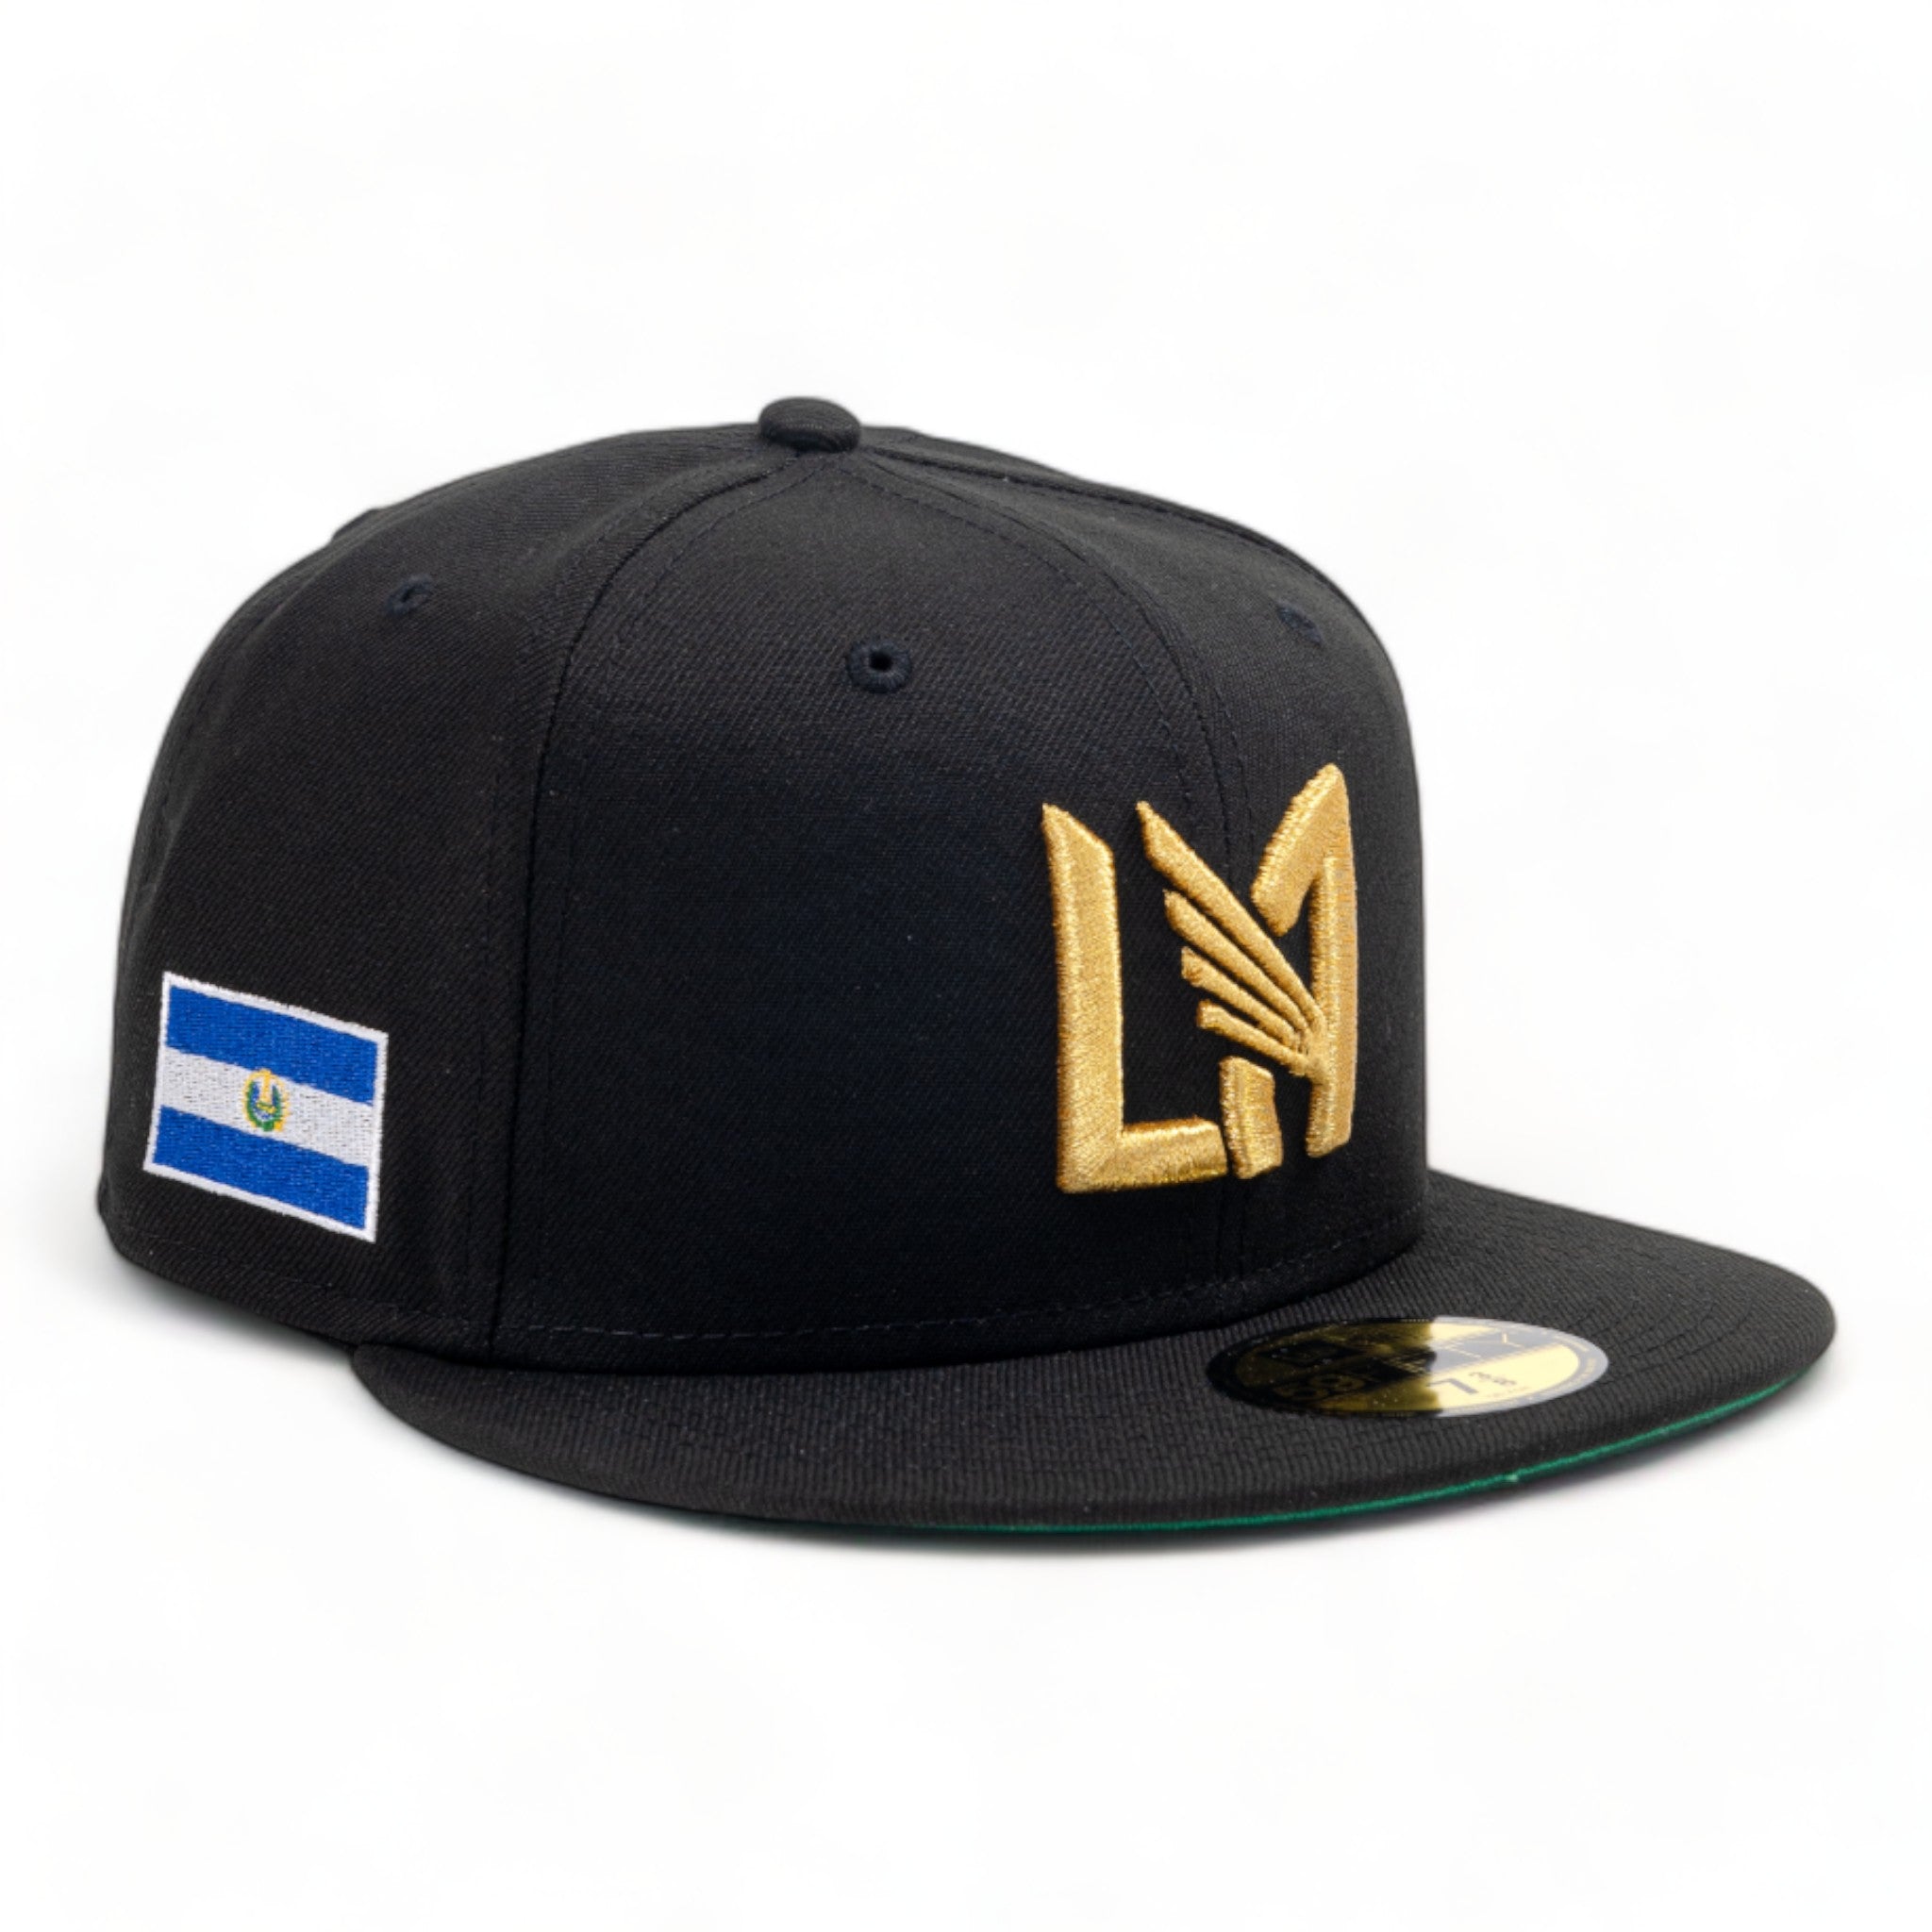 The Magnolia Park x New Era 59Fifty Fitted LAFC Heritage Collection (El Salvador Flag) (Black/Gold)